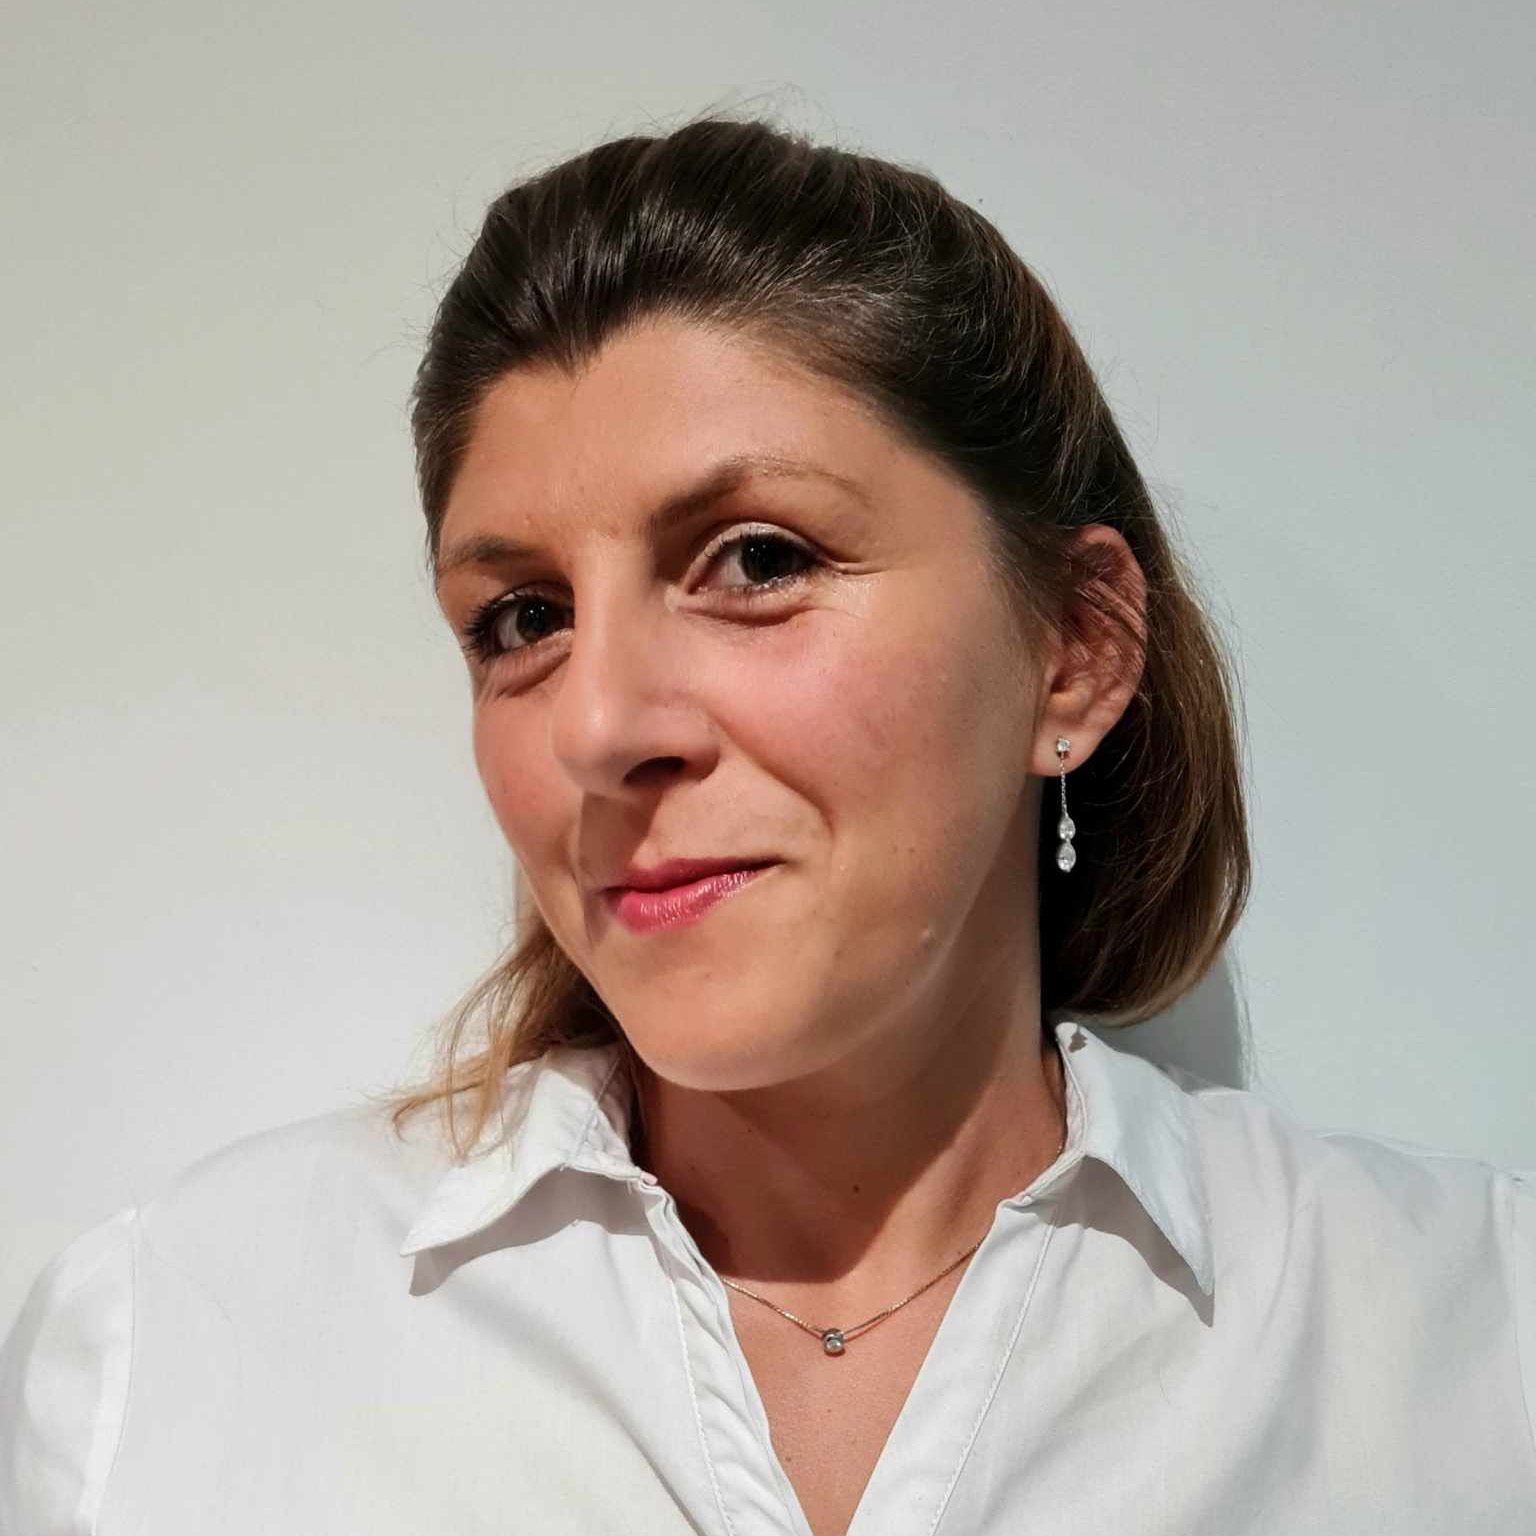 Gaëlle Baudoul